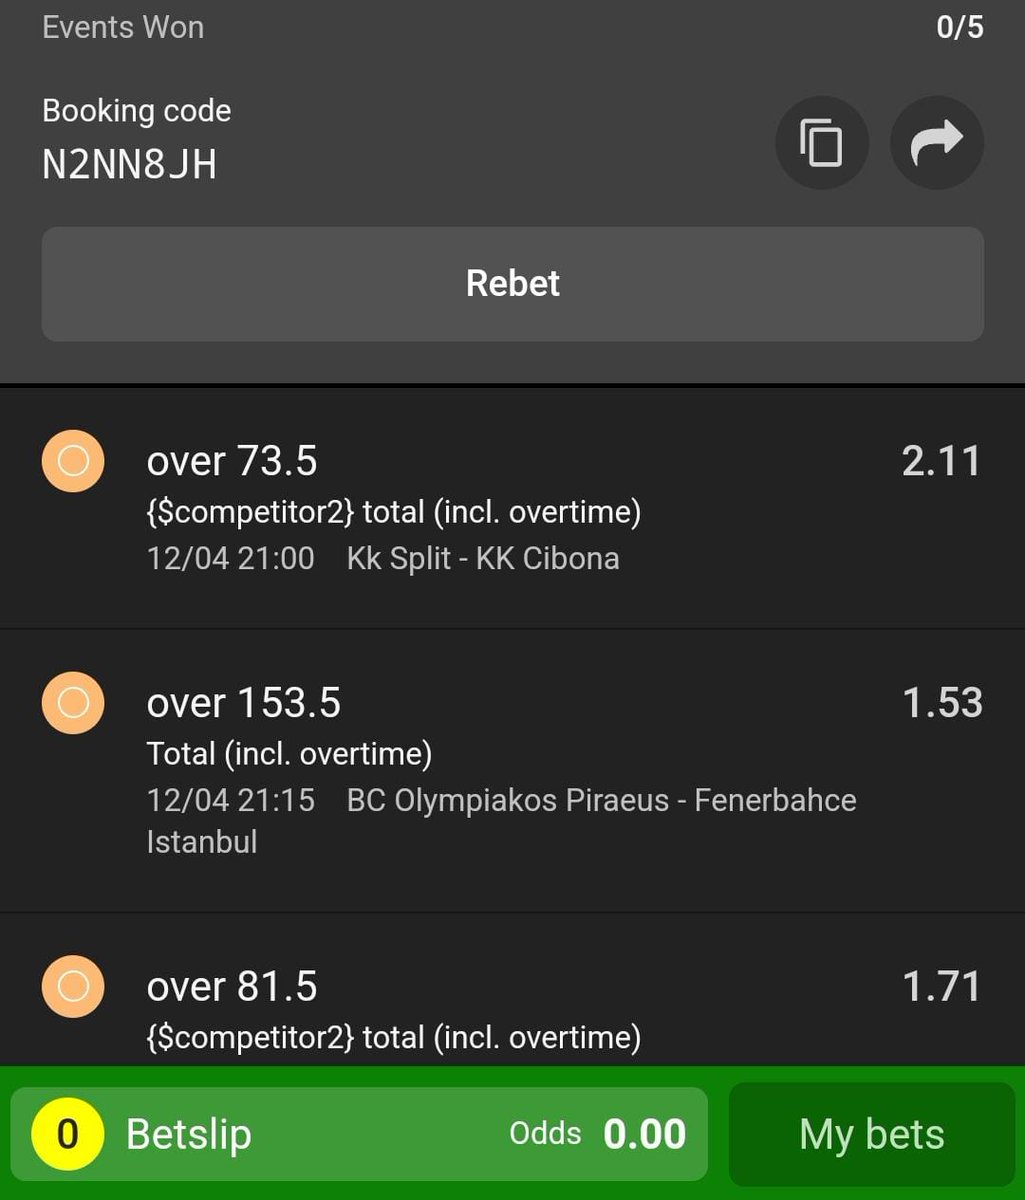 SLIP NI MOJA TU. BULLET WE GO HARDER🤑👇12 odds looks so promising and am Confidence OF A WIN. USE LINK👉 odibets.com/share/N2NN8JH BASKETBALL 🏀🙏